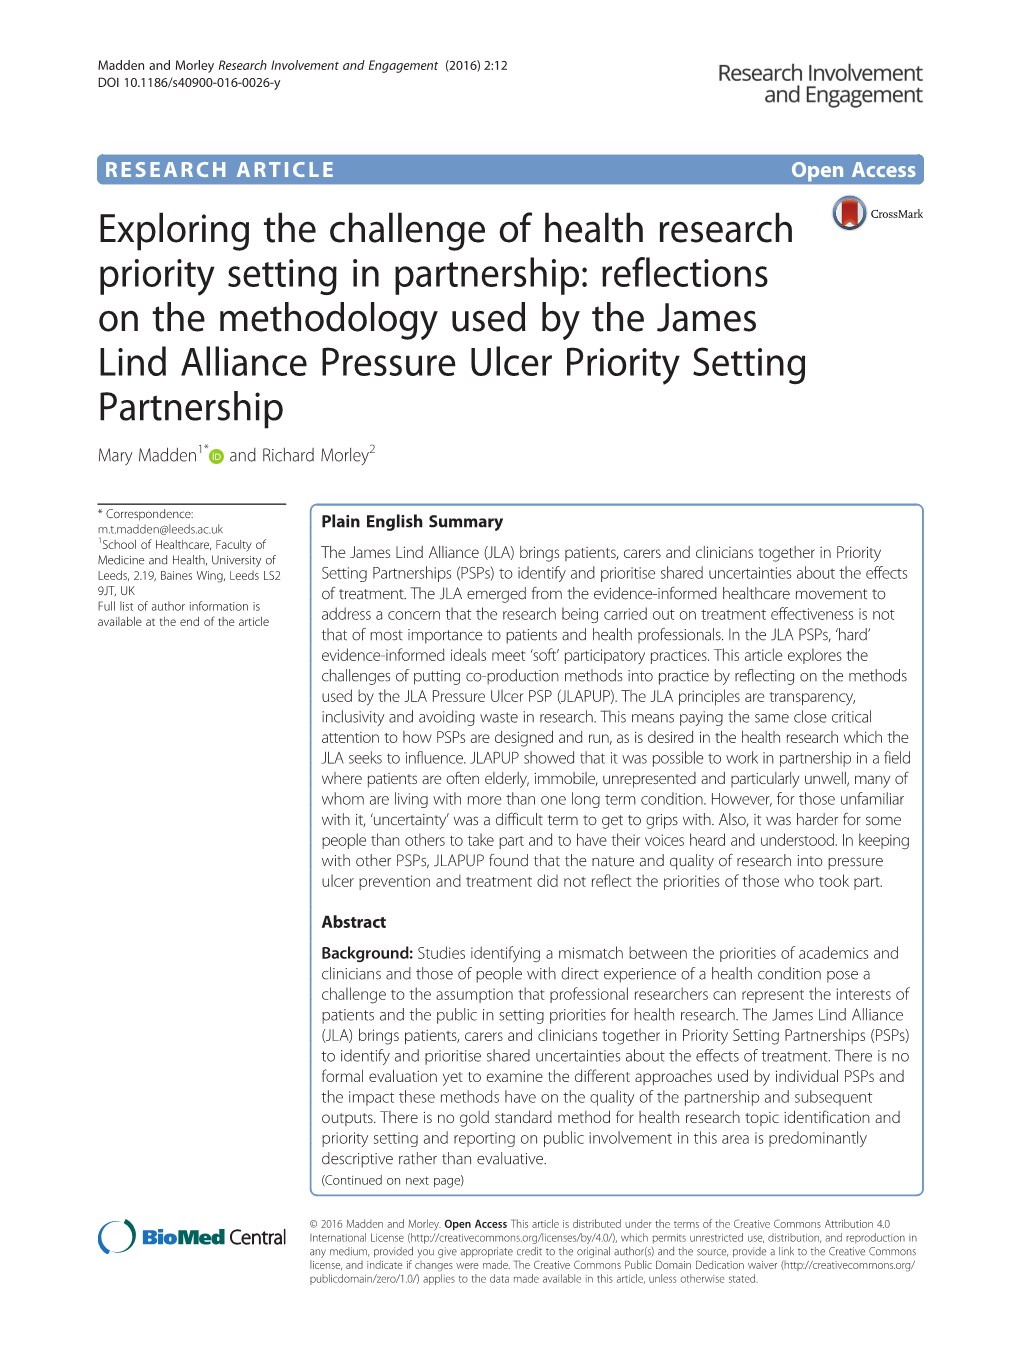 Exploring the Challenge of Health Research Priority Setting in Partnership